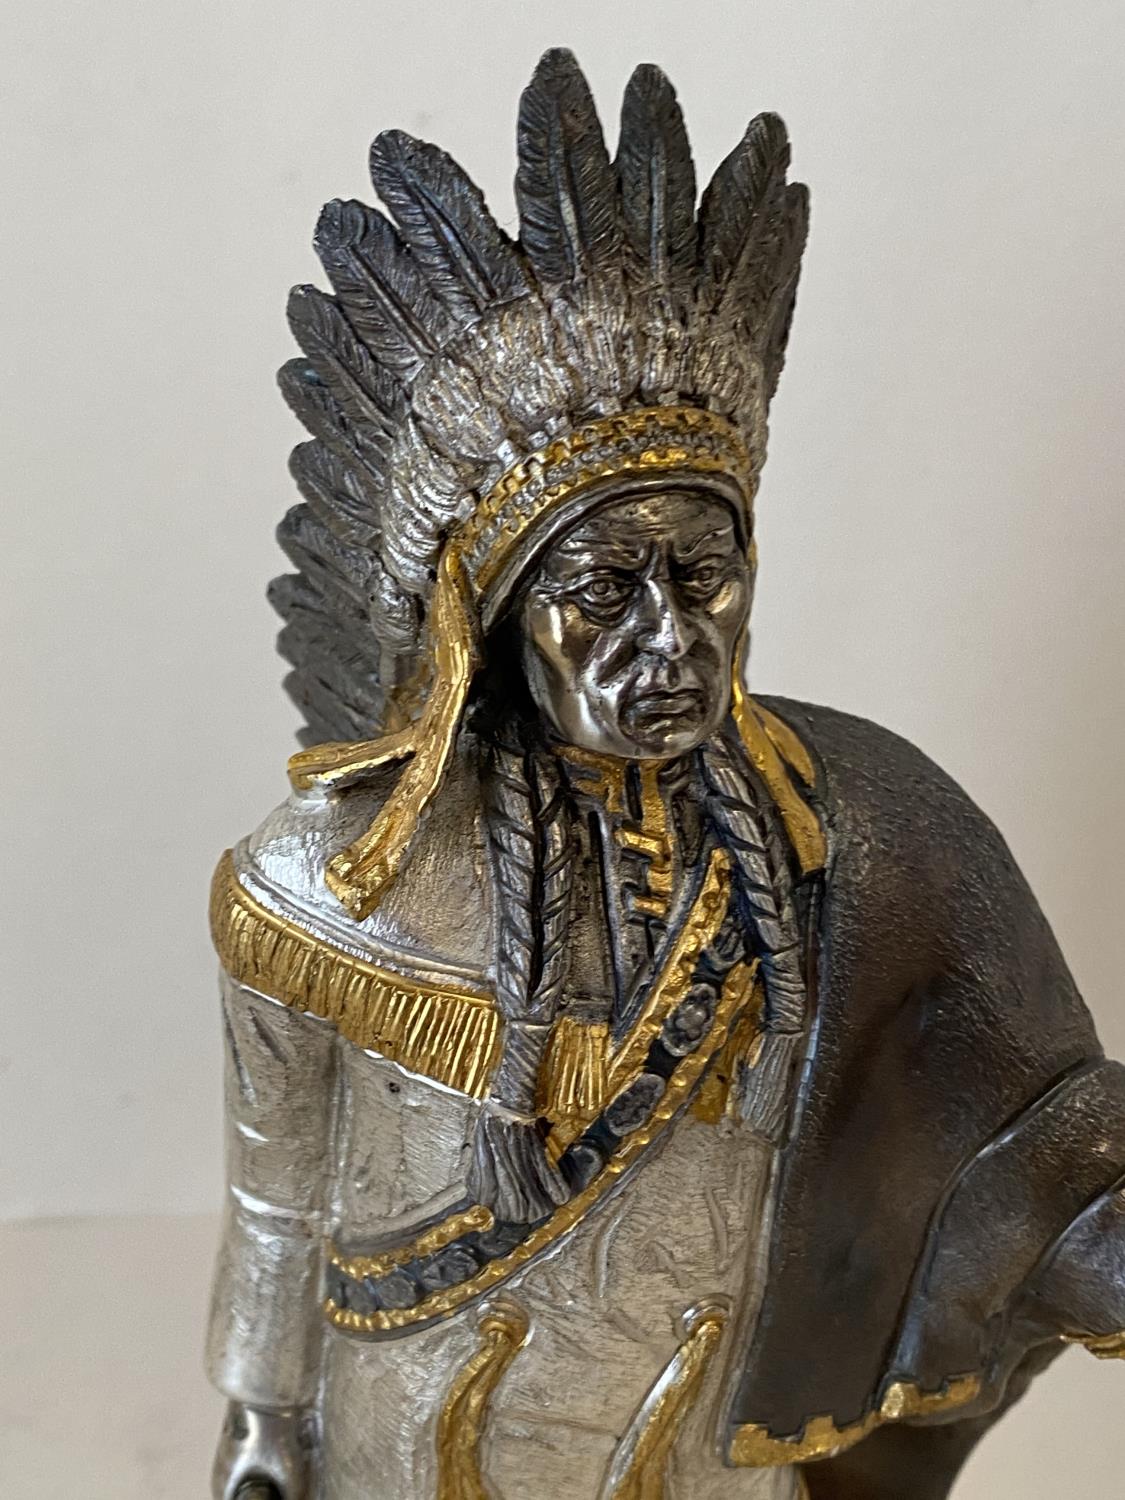 Unusual Good quality metal figure of a Red Indian warrior, intricately carved and decorated with a - Image 2 of 4